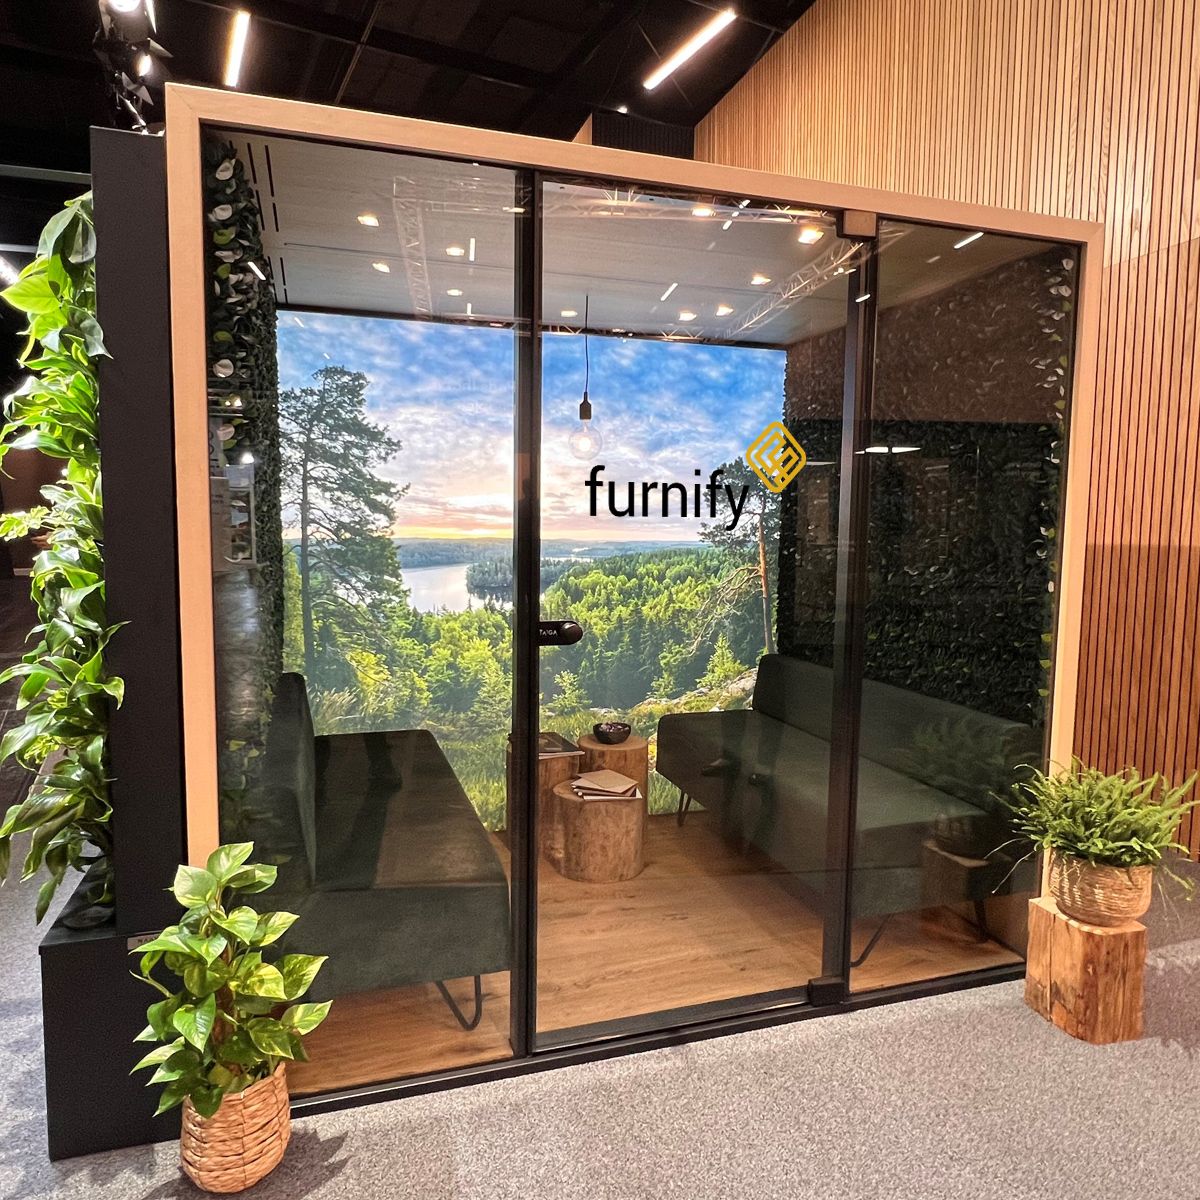 5 Reasons Why Office Meeting Pods are an Investment